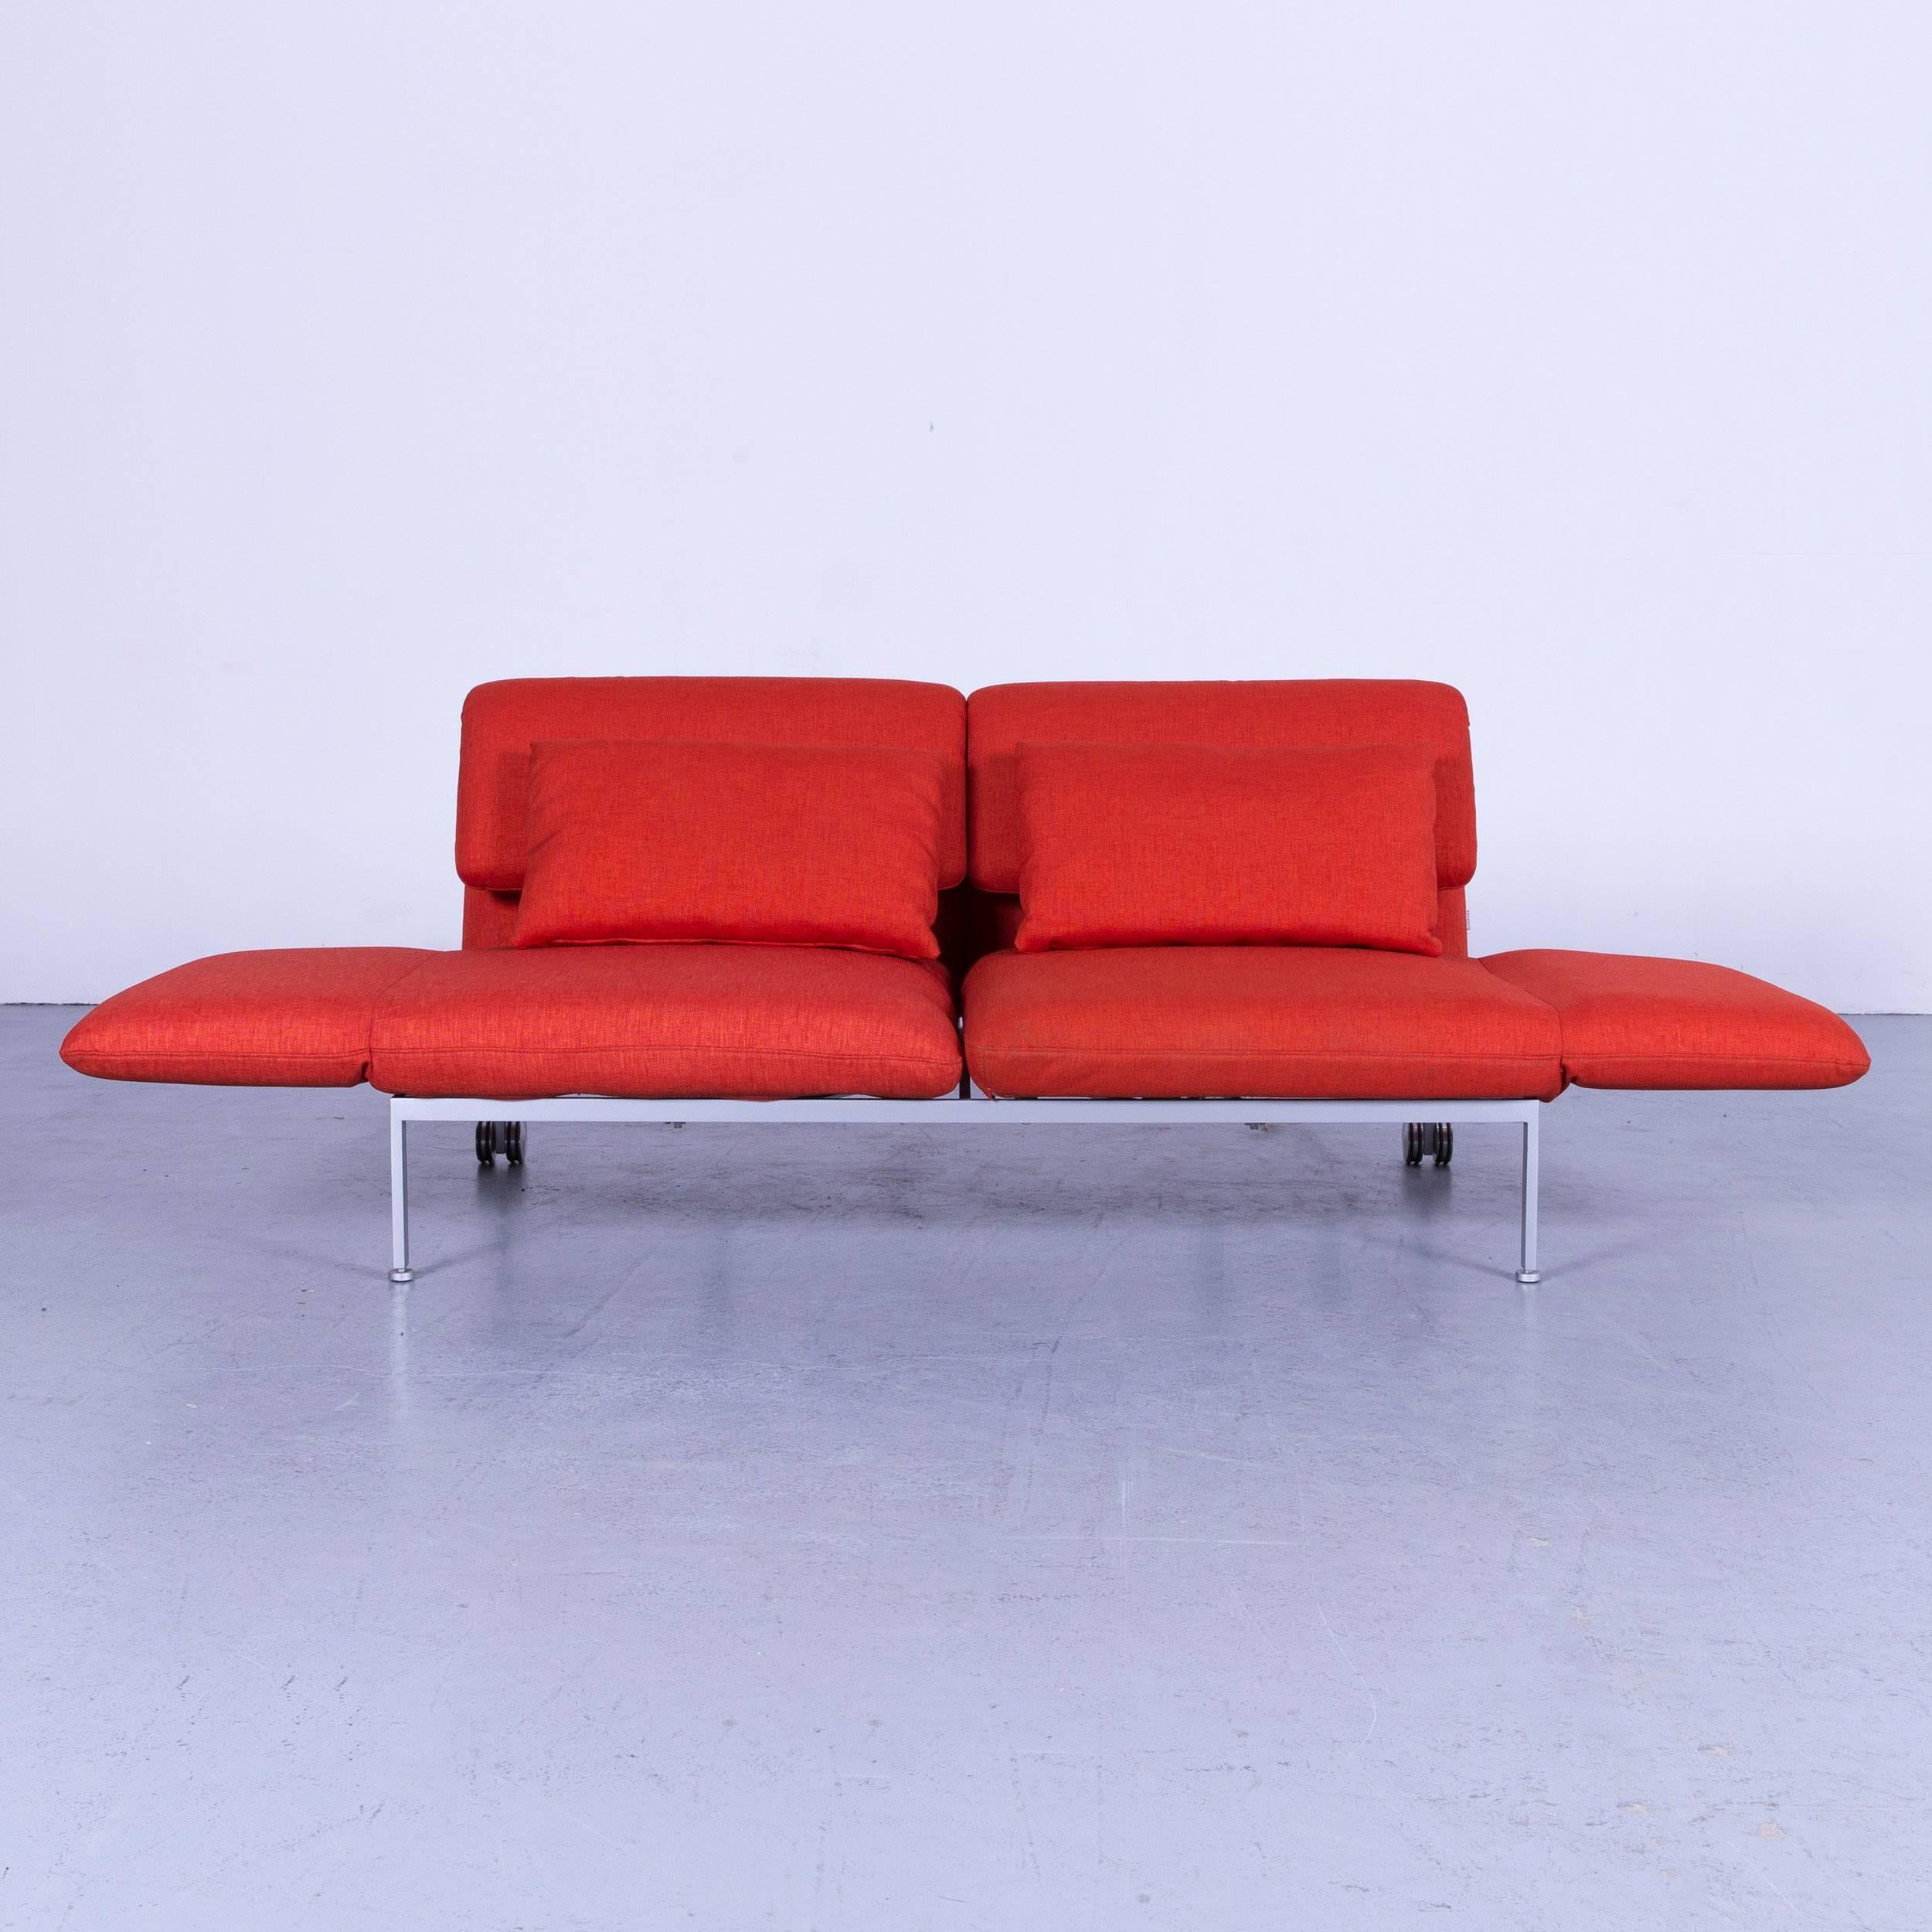 Brühl & Sippold Roro designer bed sofa in red orange fabric with great functions.